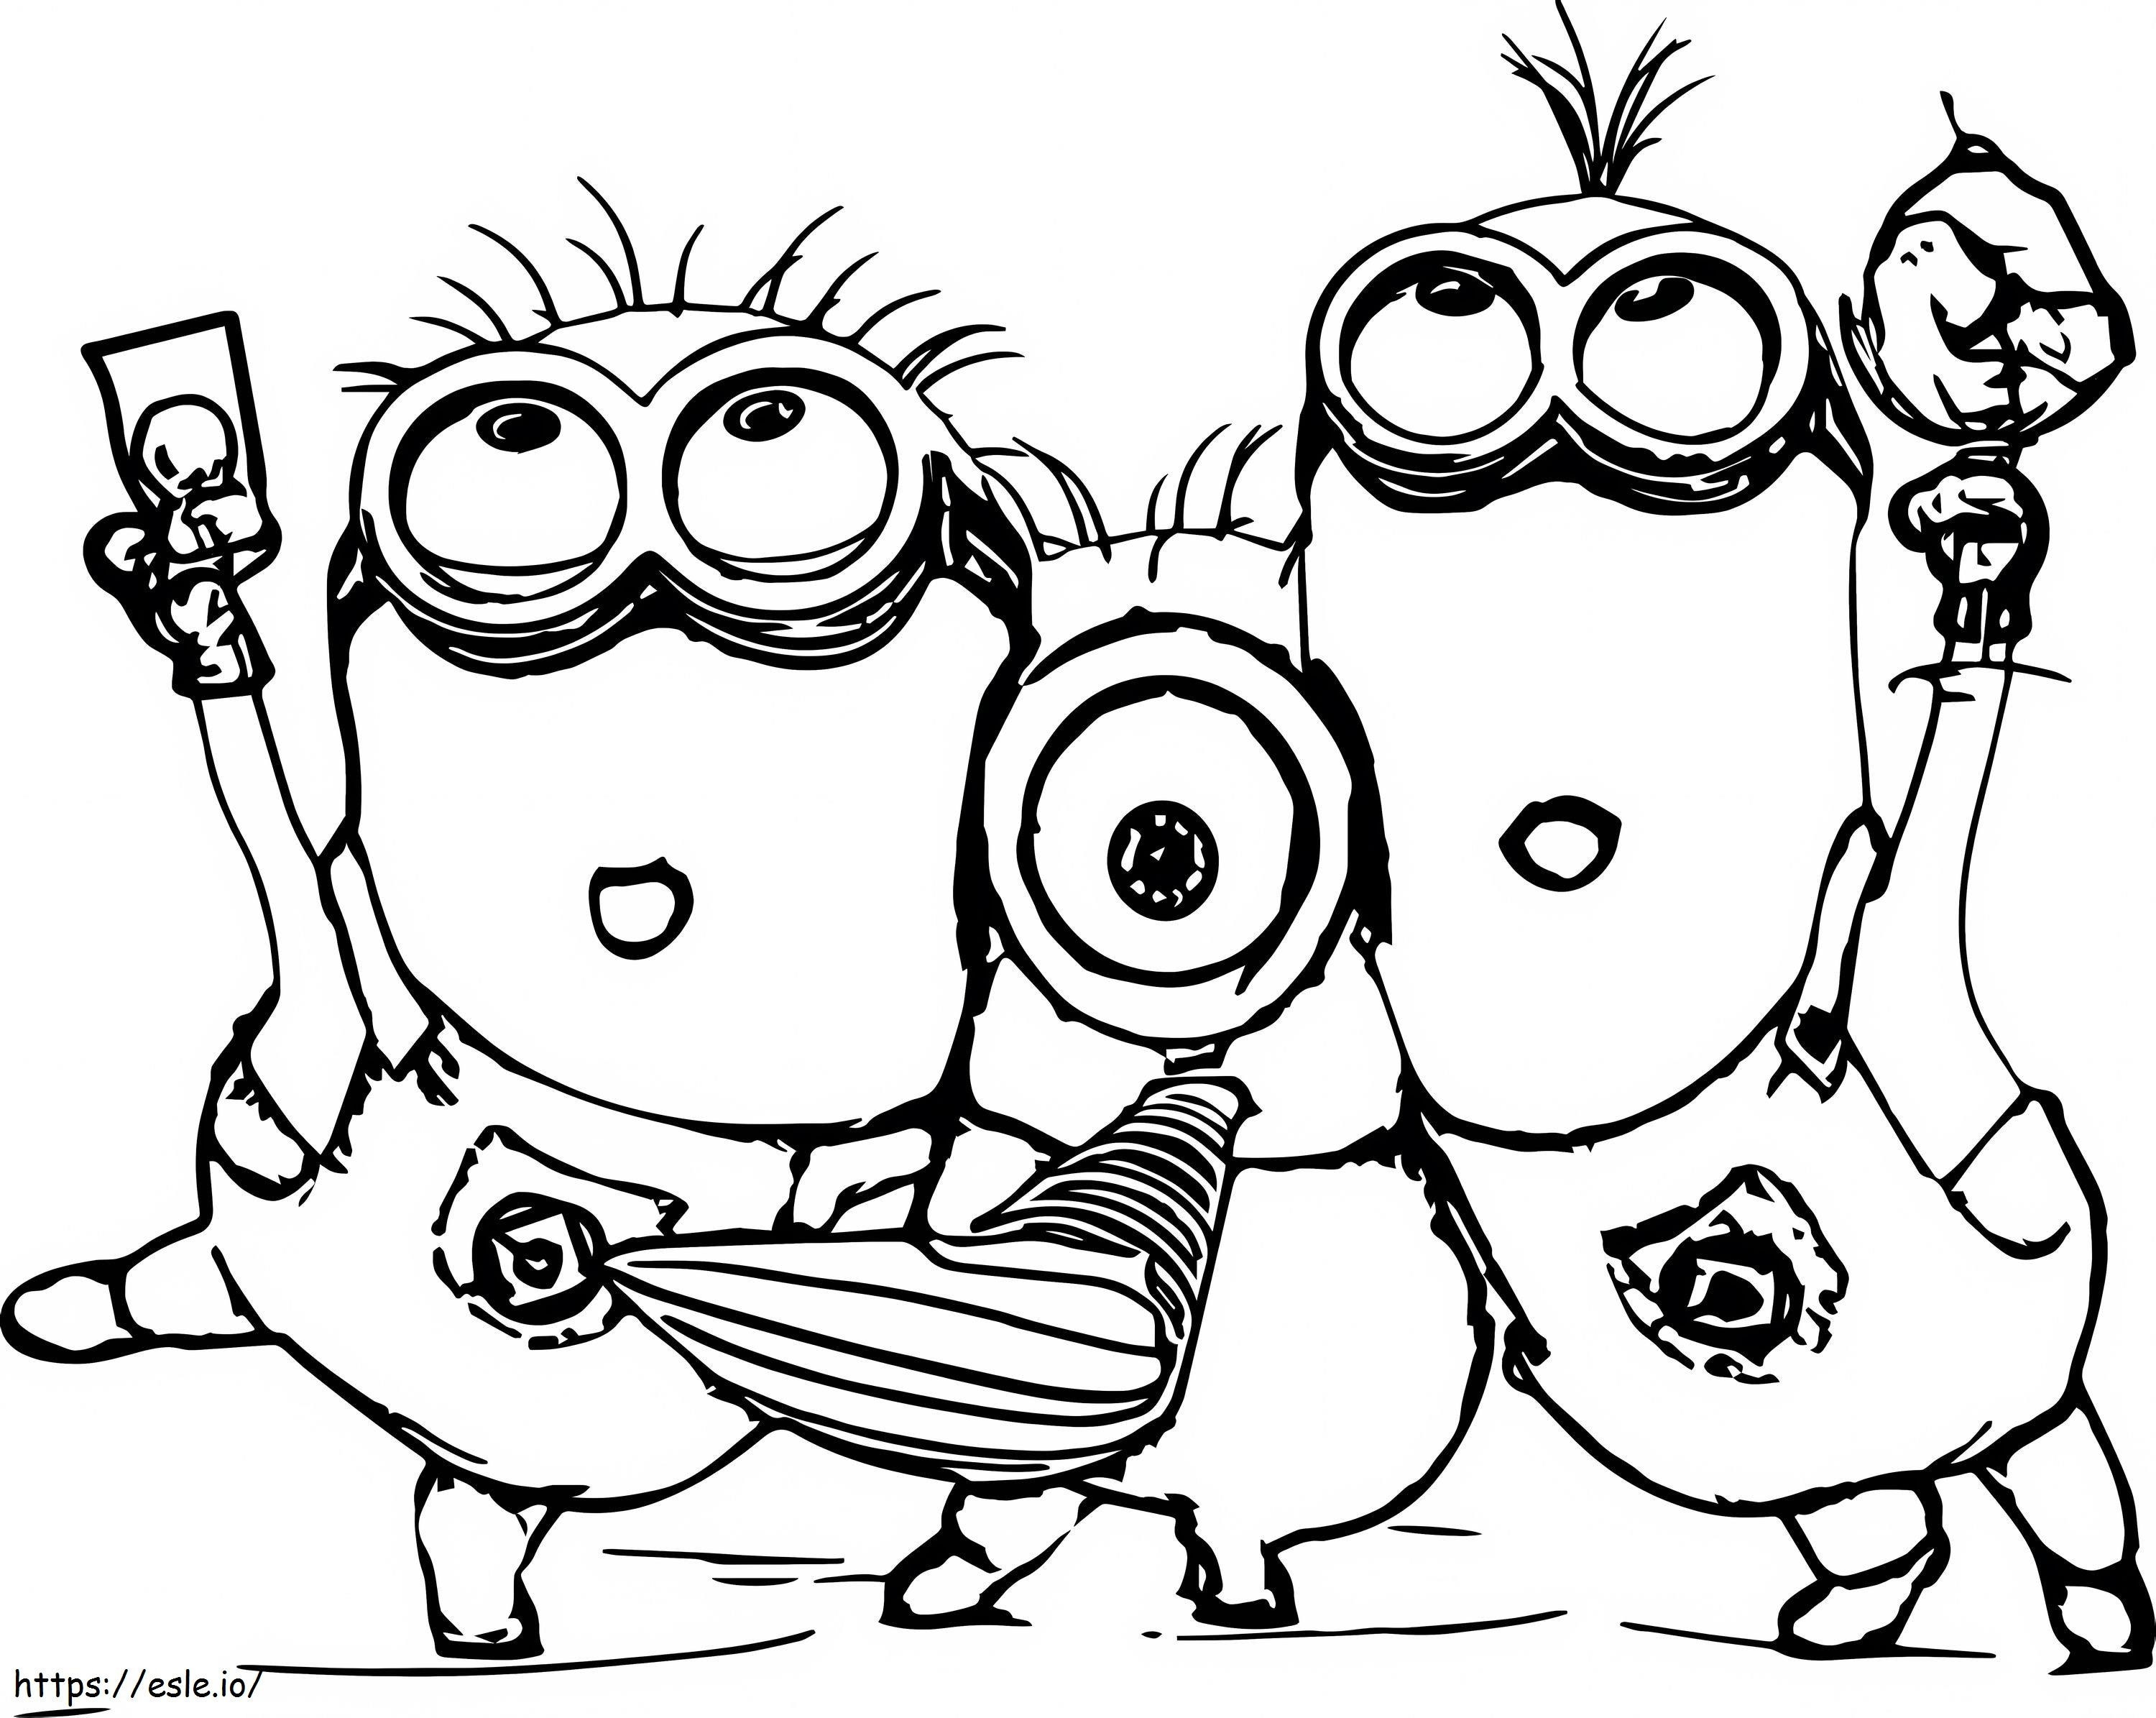 Draw Three Minions coloring page